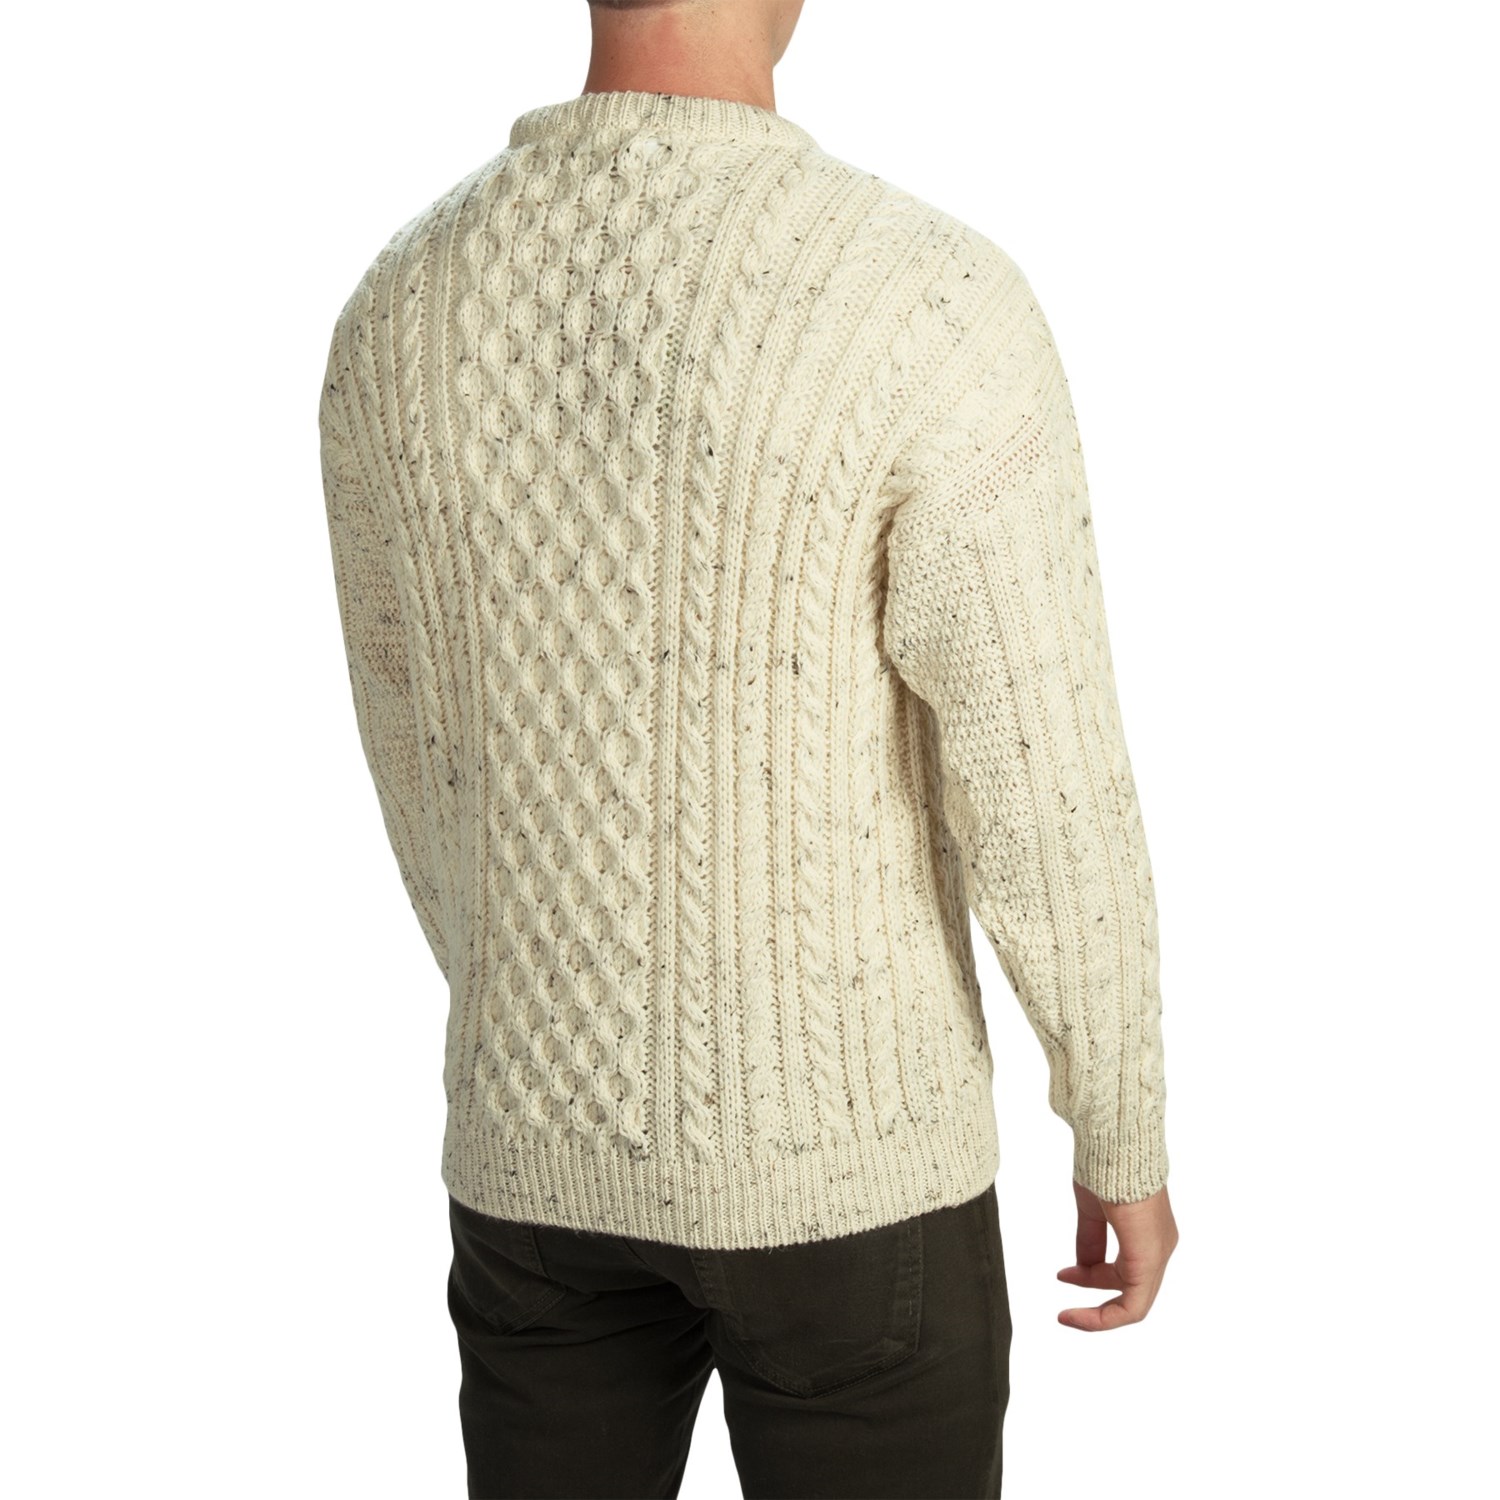 Peregrine by J.G. Glover English Wool Sweater (For Men) 37358 - Save 57%